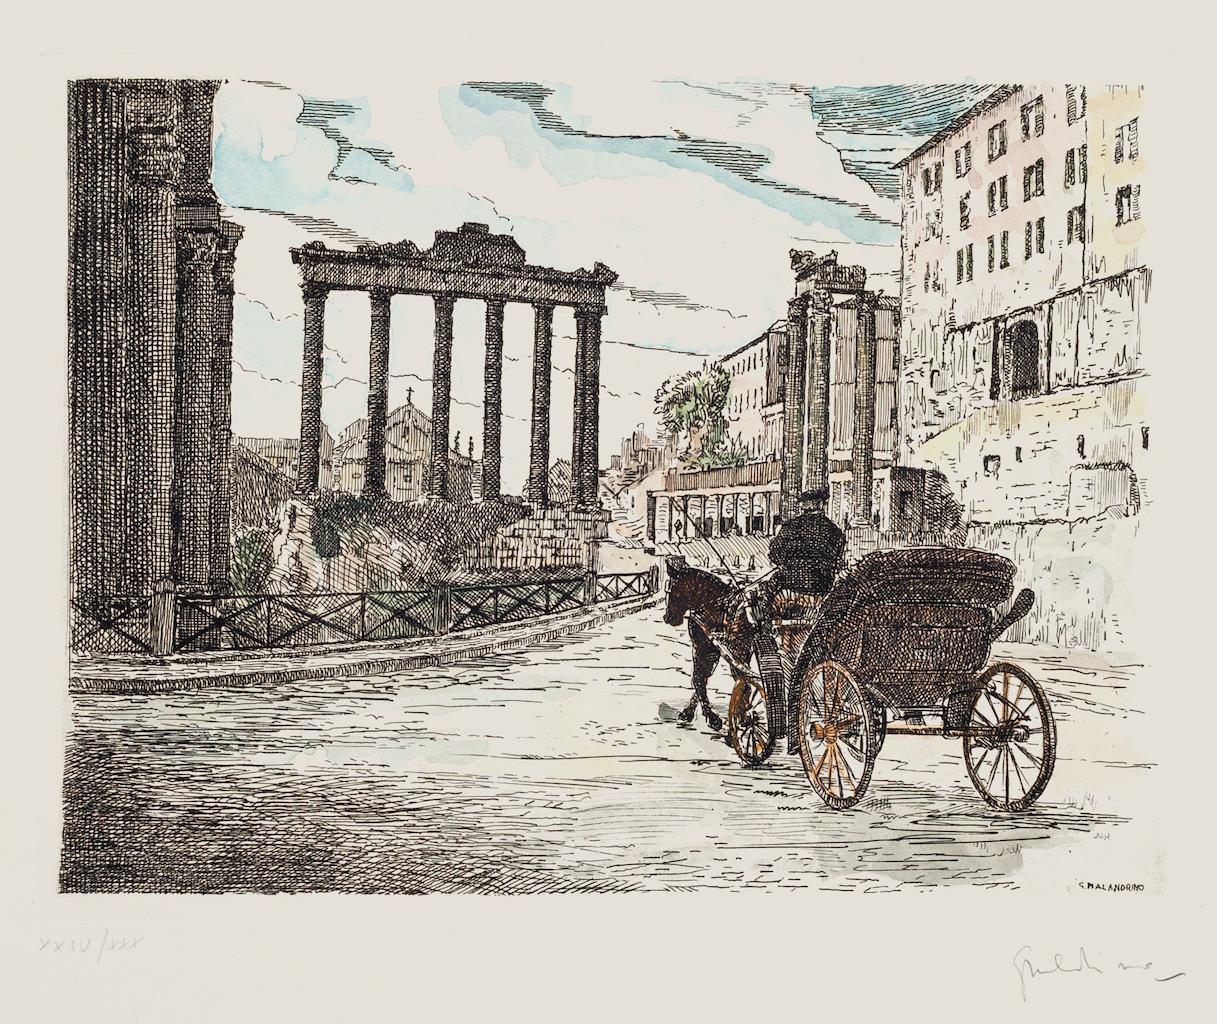 Roman Landscape is an original etching artwork realized by the Italian artist Giuseppe Malandrino.

hand-signed by the artist on the lower right in pencil.

Numbered in Roman numerals, edition o XXIV/XXX prints.

Image Dimensions: 24 x 32